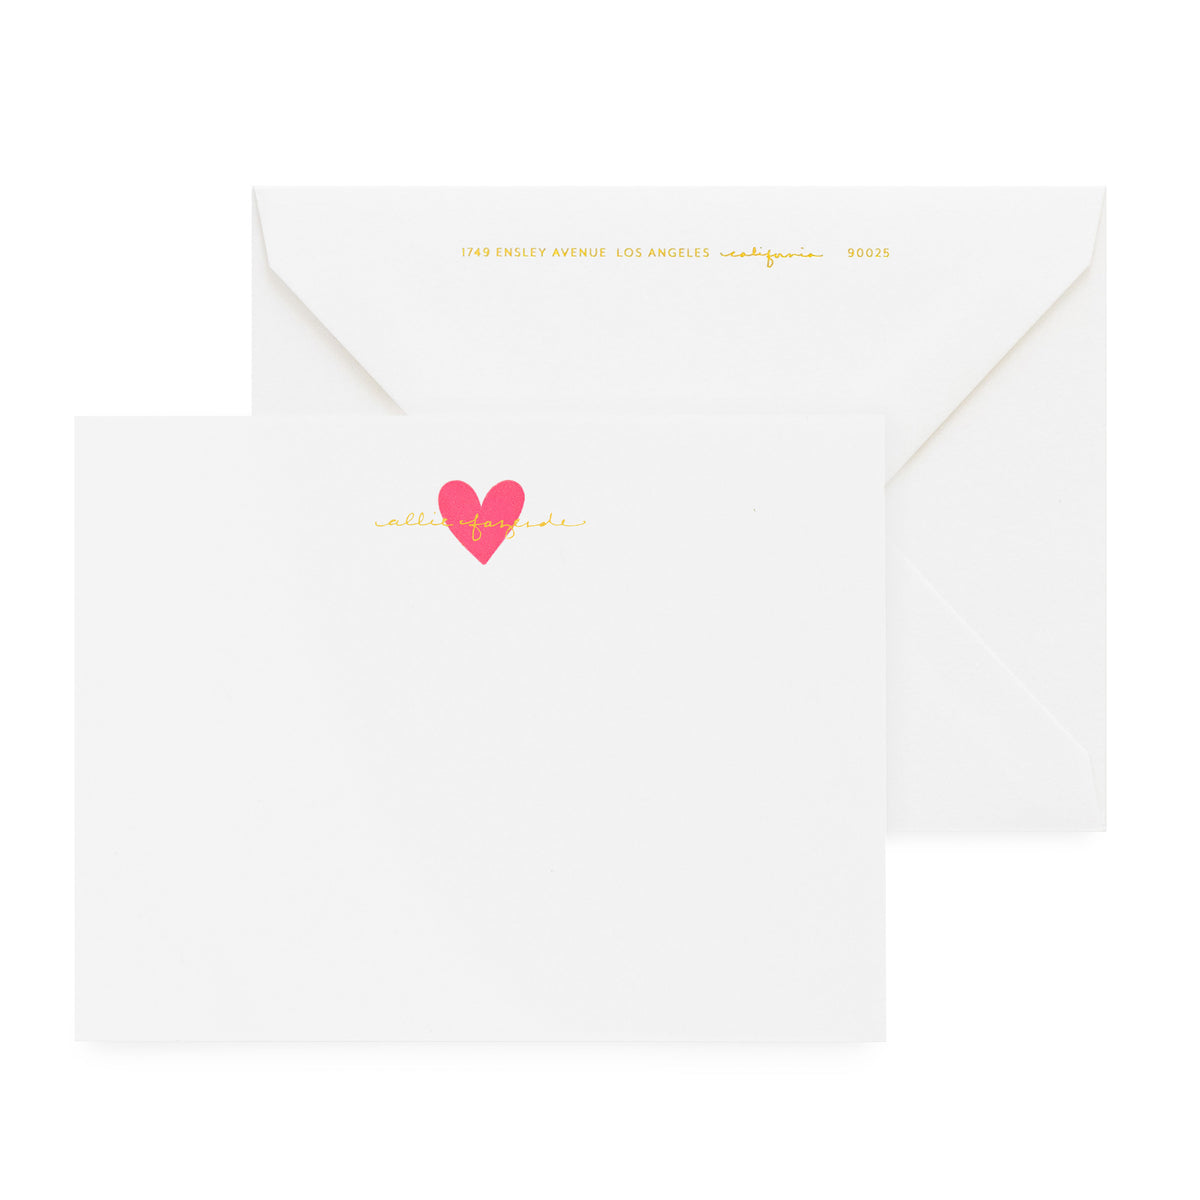 white card with neon heart and gold foil text, white envelope text, 